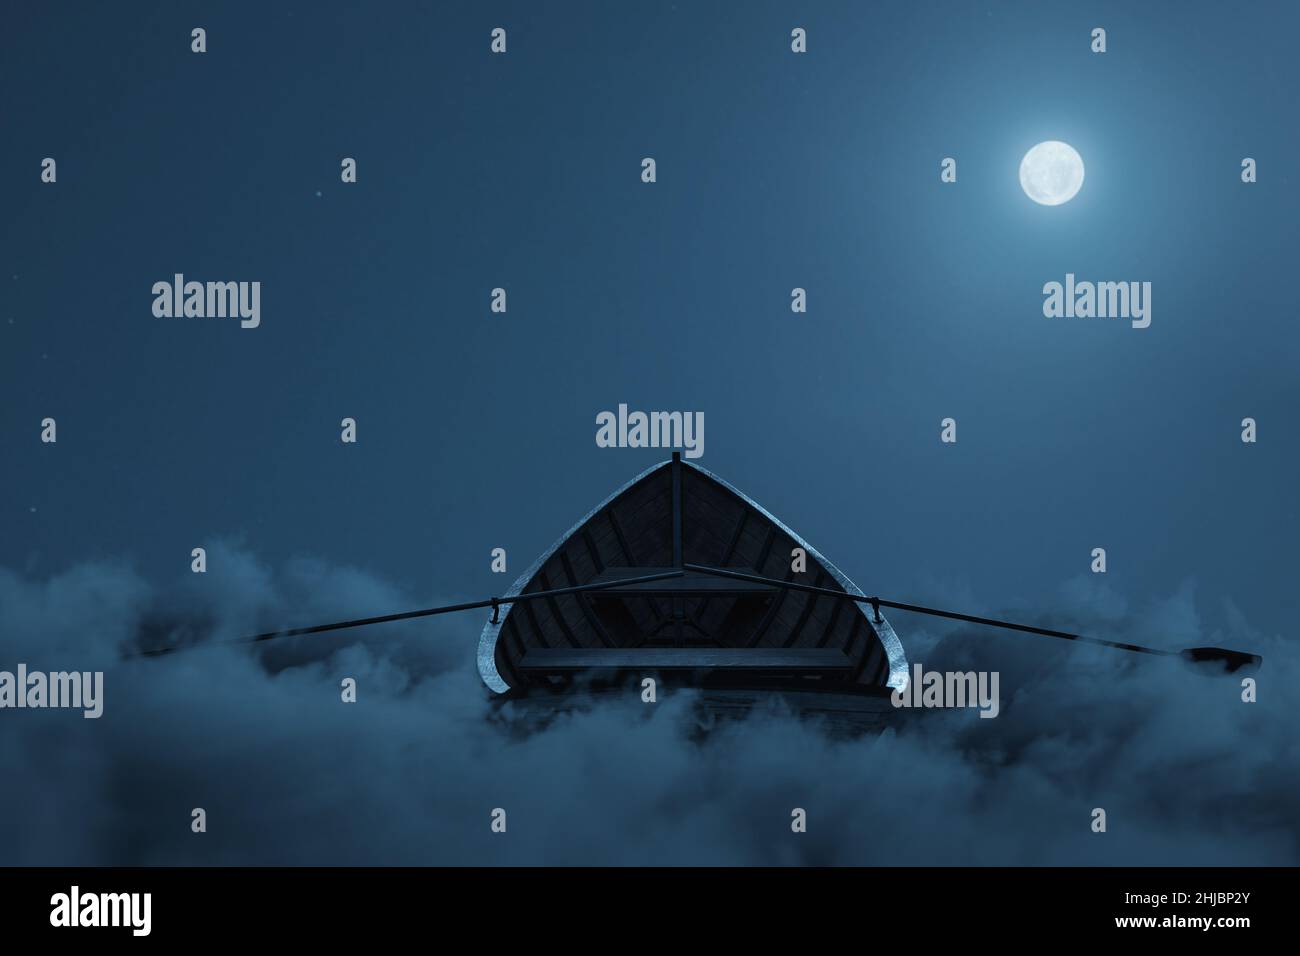 3d rendering of abandoned wooden boat over fluffy night clouds. Illuminated from moonlight Stock Photo